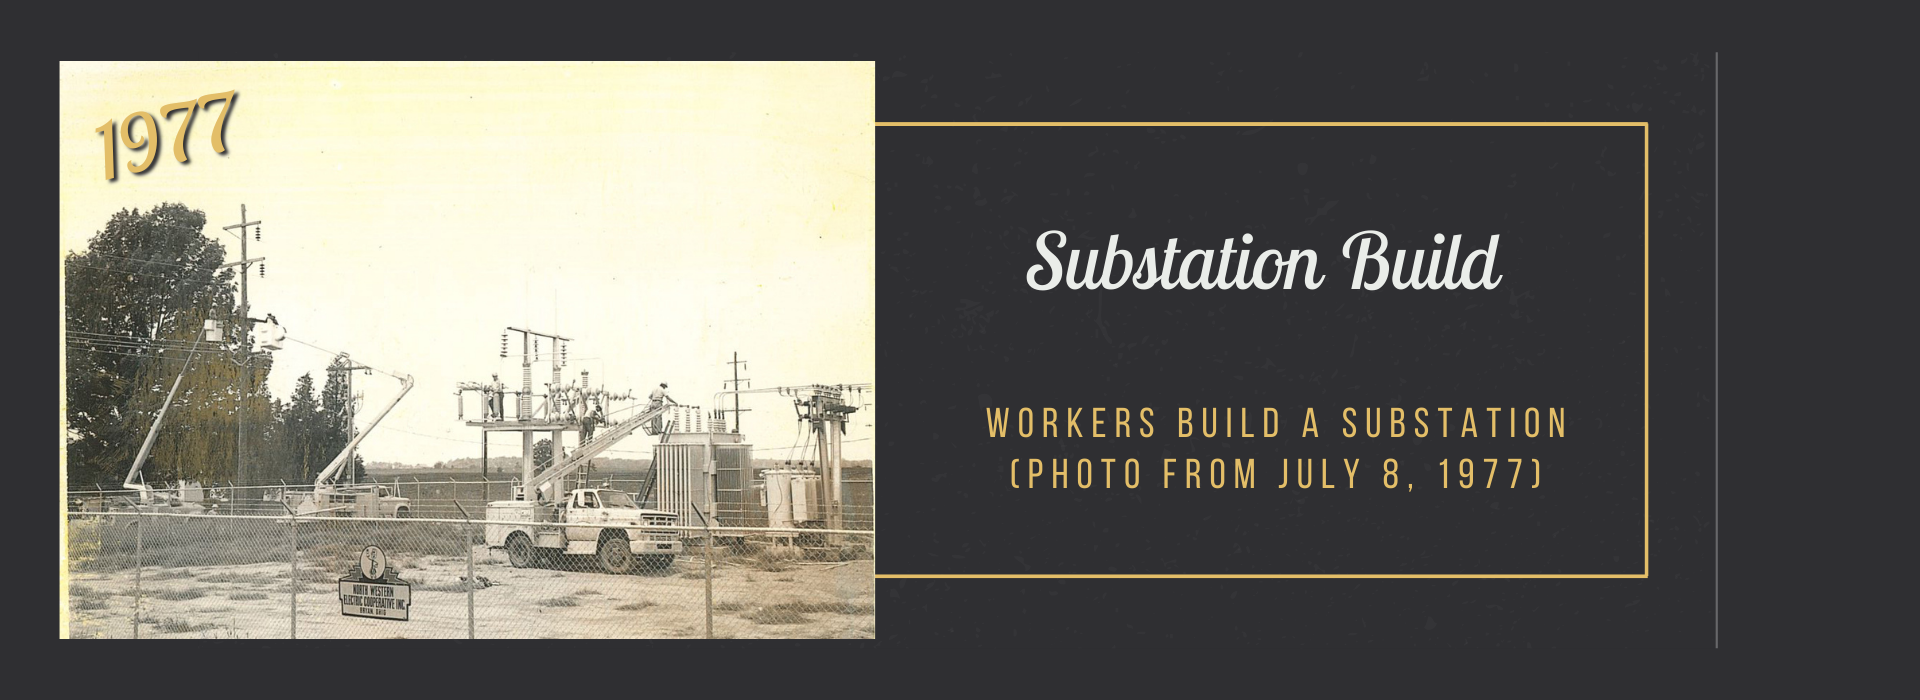 Workers build a substation (photo from July 8, 1977)